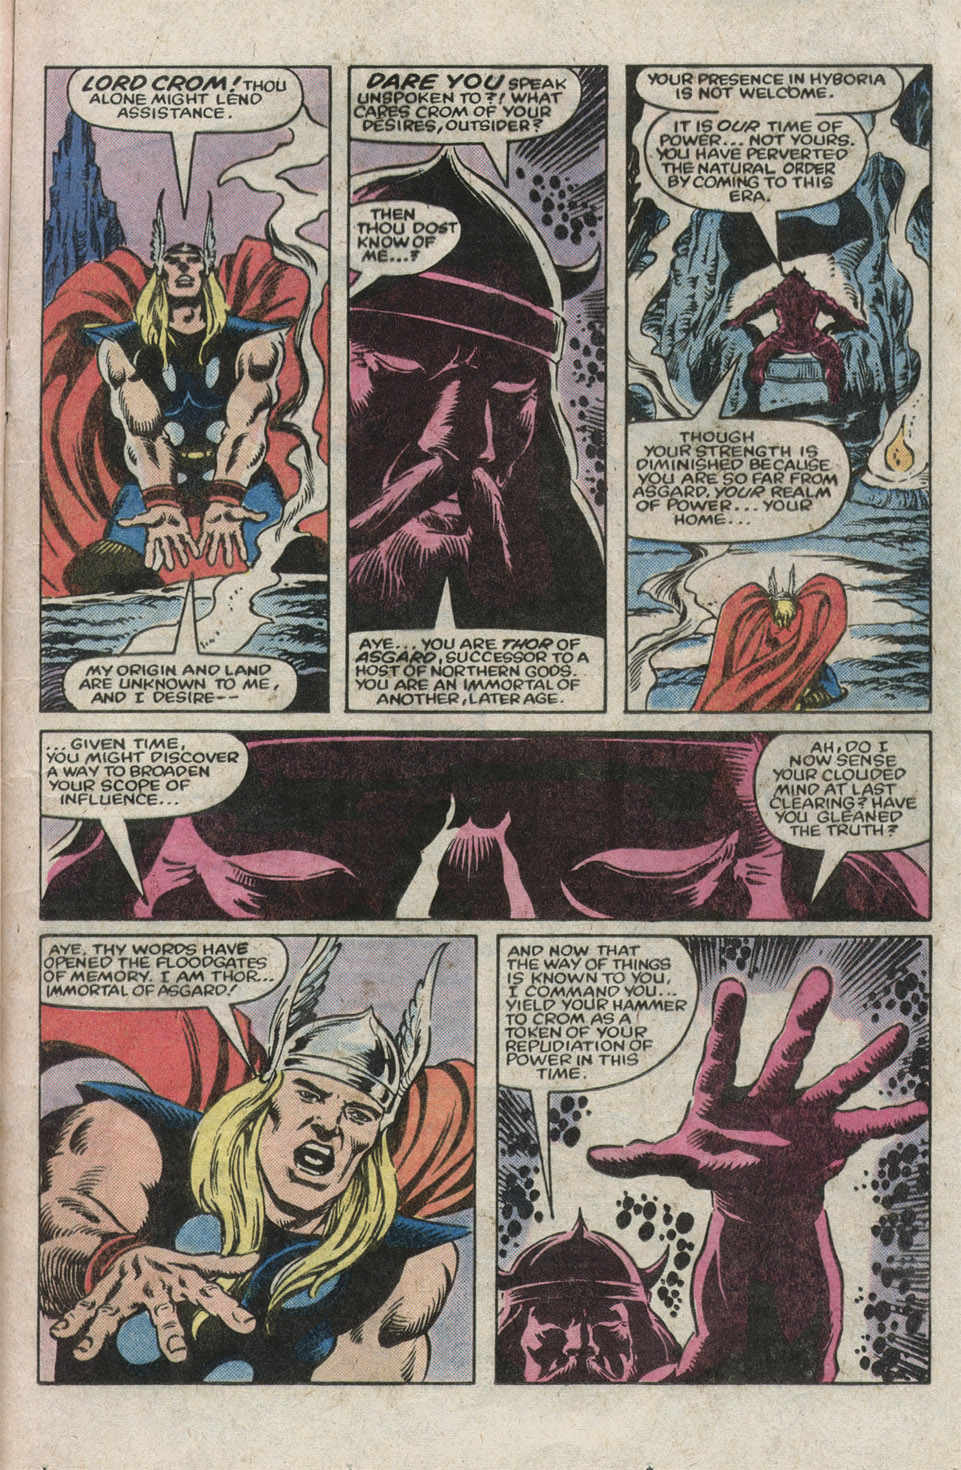 What If? (1977) issue 39 - Thor battled conan - Page 25